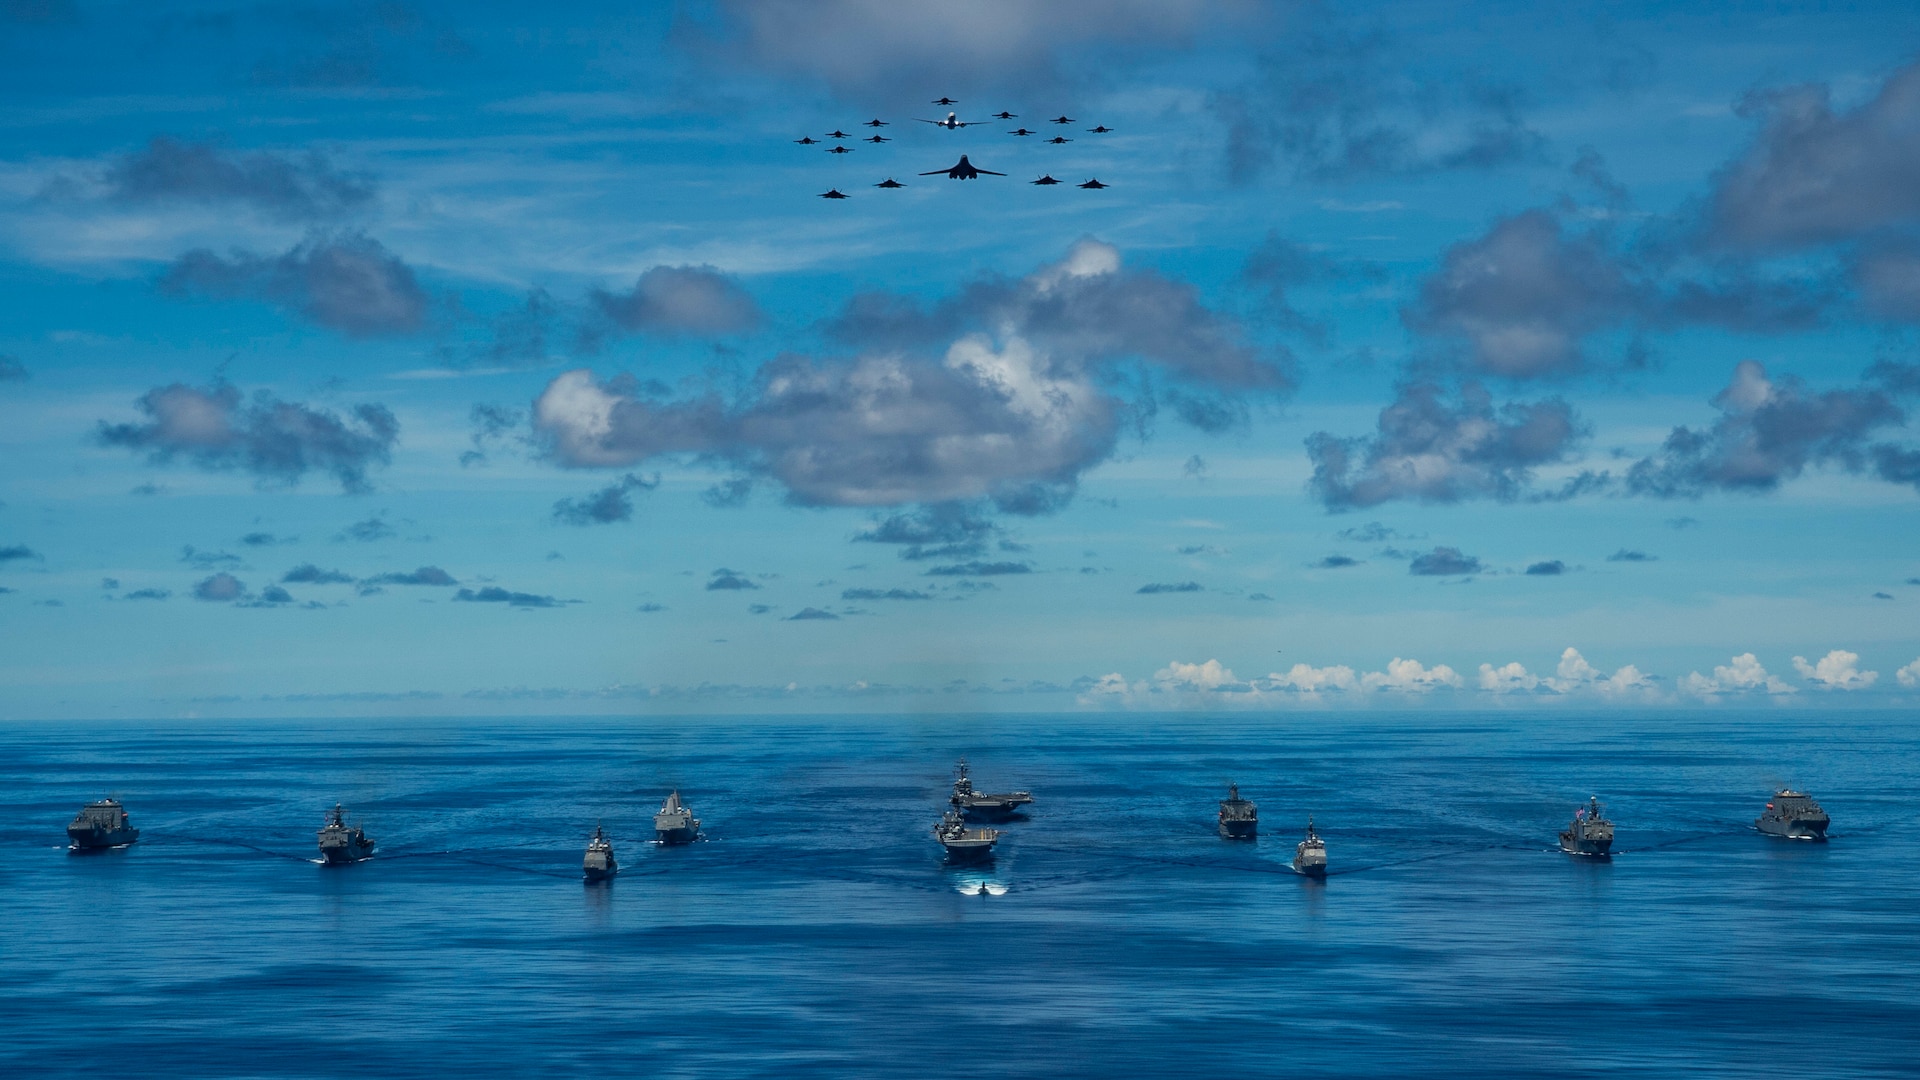 IMAGE: PHILIPPINE SEA (Sept. 25, 2020) - USNS Charles Drew (T-AKE 10), USS Comstock (LSD 45), USS Shiloh (CG 67), USS New Orleans (LPD 18), USS Chicago (SSN 721), USS America (LHA 6), USS Ronald Reagan (CVN 76), USNS John Ericsson (T-AO 194), USS Antietam (CG 54), USS Germantown (LSD 42) and USNS Sacagawea (T-AKE 2) steam in formation while E/A-18G Growlers, FA-18E Super Hornets, a P-8 Poseidon, U.S. Air Force F-22 Raptors and a B-1B Bomber fly over the formation in support of Valiant Shield 2020. Meanwhile, a team of Naval Surface Warfare Center Dahlgren Division (NSWCDD) scientists and engineers worked from two locations – Dahlgren, Va., and Honolulu, Hawaii – to ensure the success of this year’s Valiant Shield exercise. “Our biggest strategic accomplishment was supporting live forces, both afloat and at terrestrial sites, using a combined in-person and local operations team,” said Joseph Pack, NSWCDD deputy director for expeditionary warfare, regarding Dahlgren’s impact on the exercise that focuses on the integration of joint training in a blue-water environment among U.S. forces.  (U.S. Navy photo by Mass Communication Specialist 2nd Class Codie L. Soule)